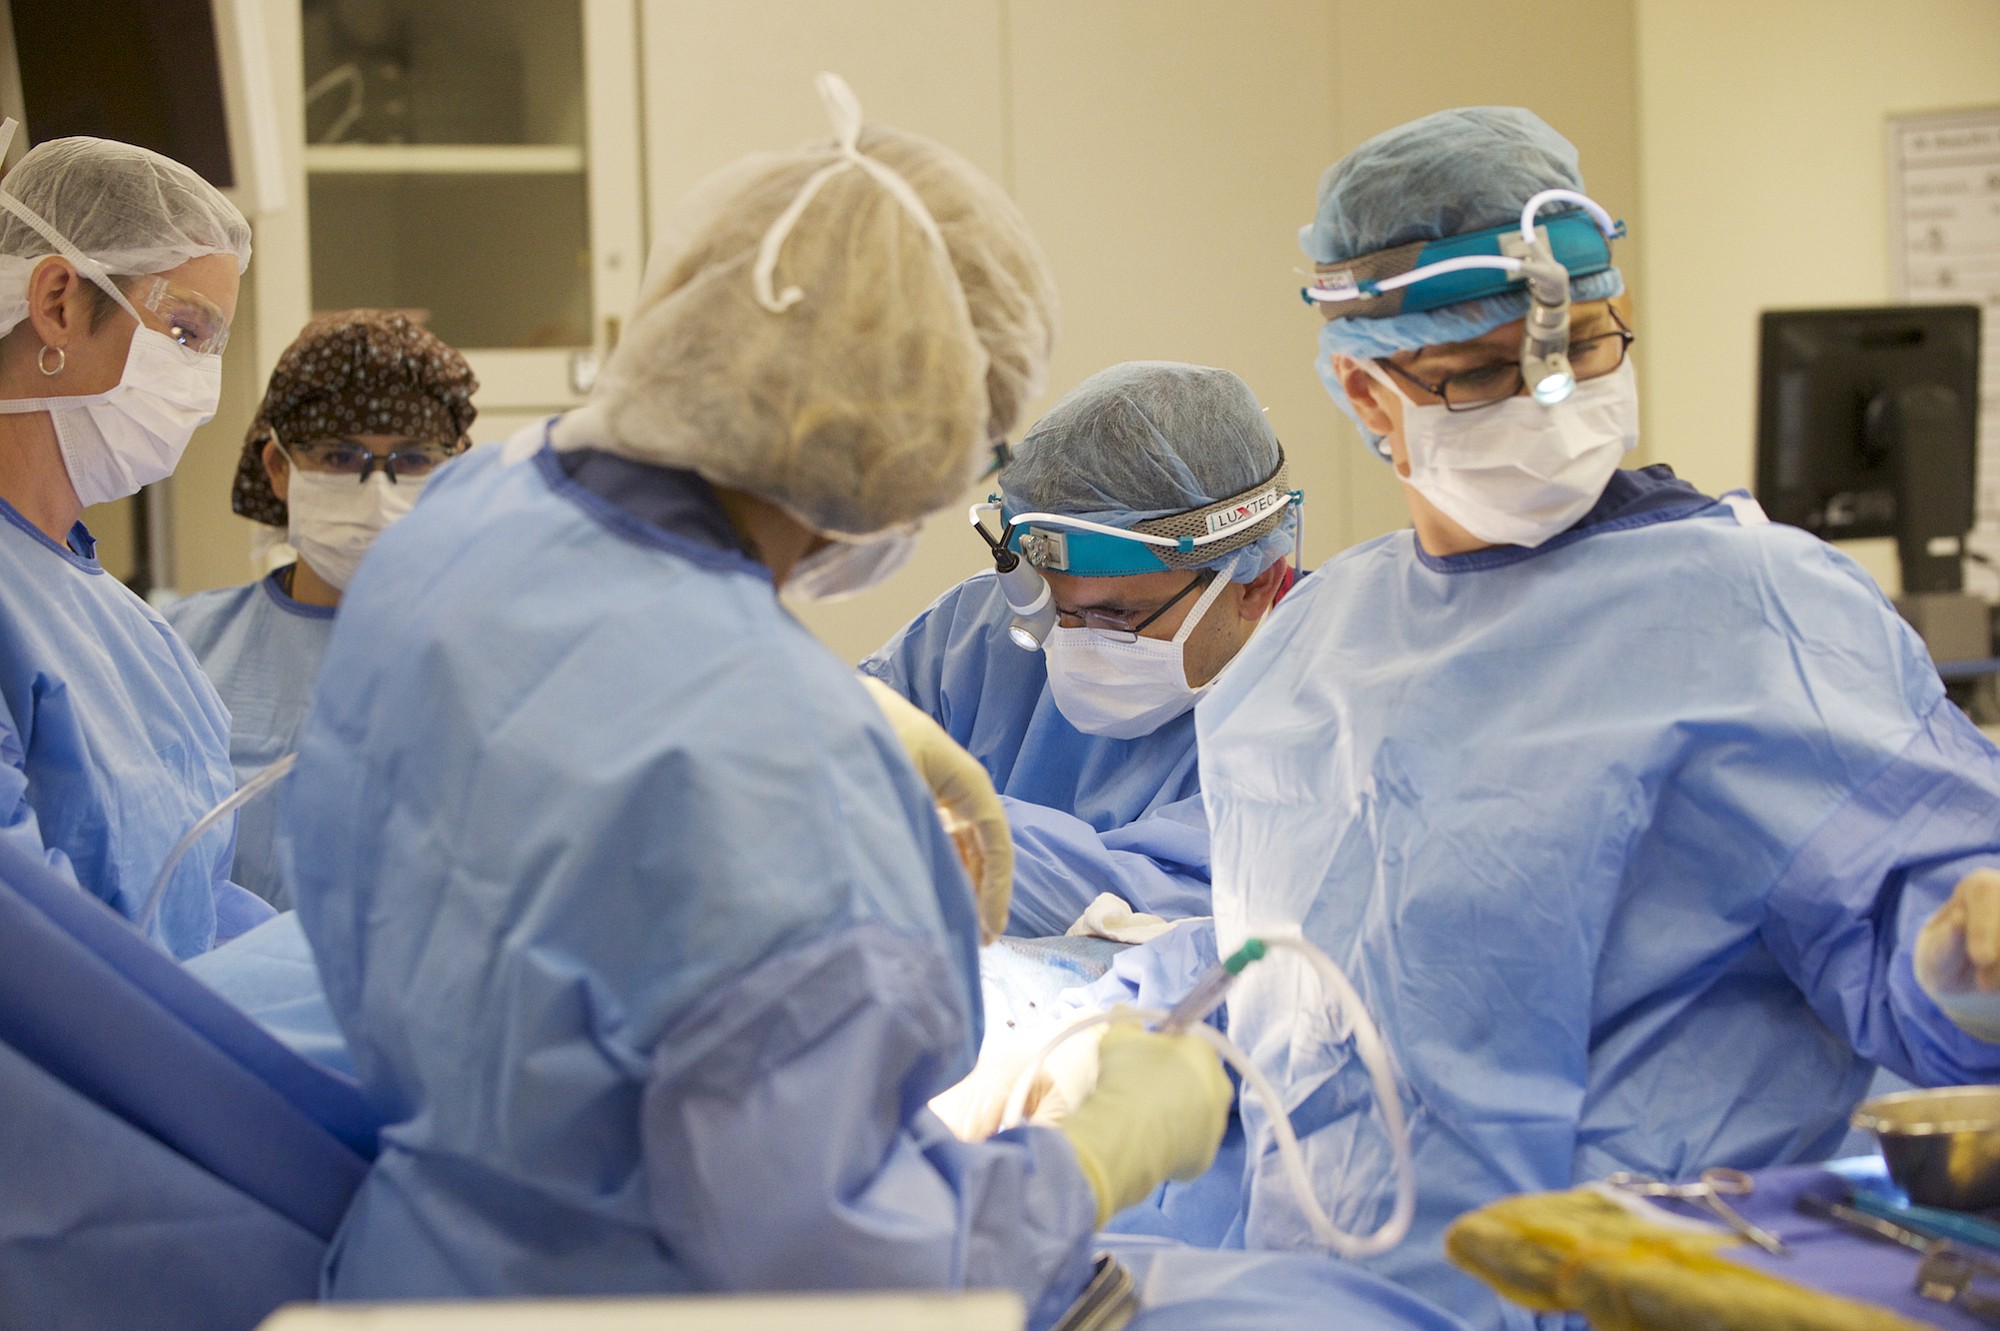 Dr. Allen Gabriel, second from right, injects Botox into the pectoral muscle of a patient during breast reconstruction surgery Sept. 2 at PeaceHealth Southwest Medical Center.